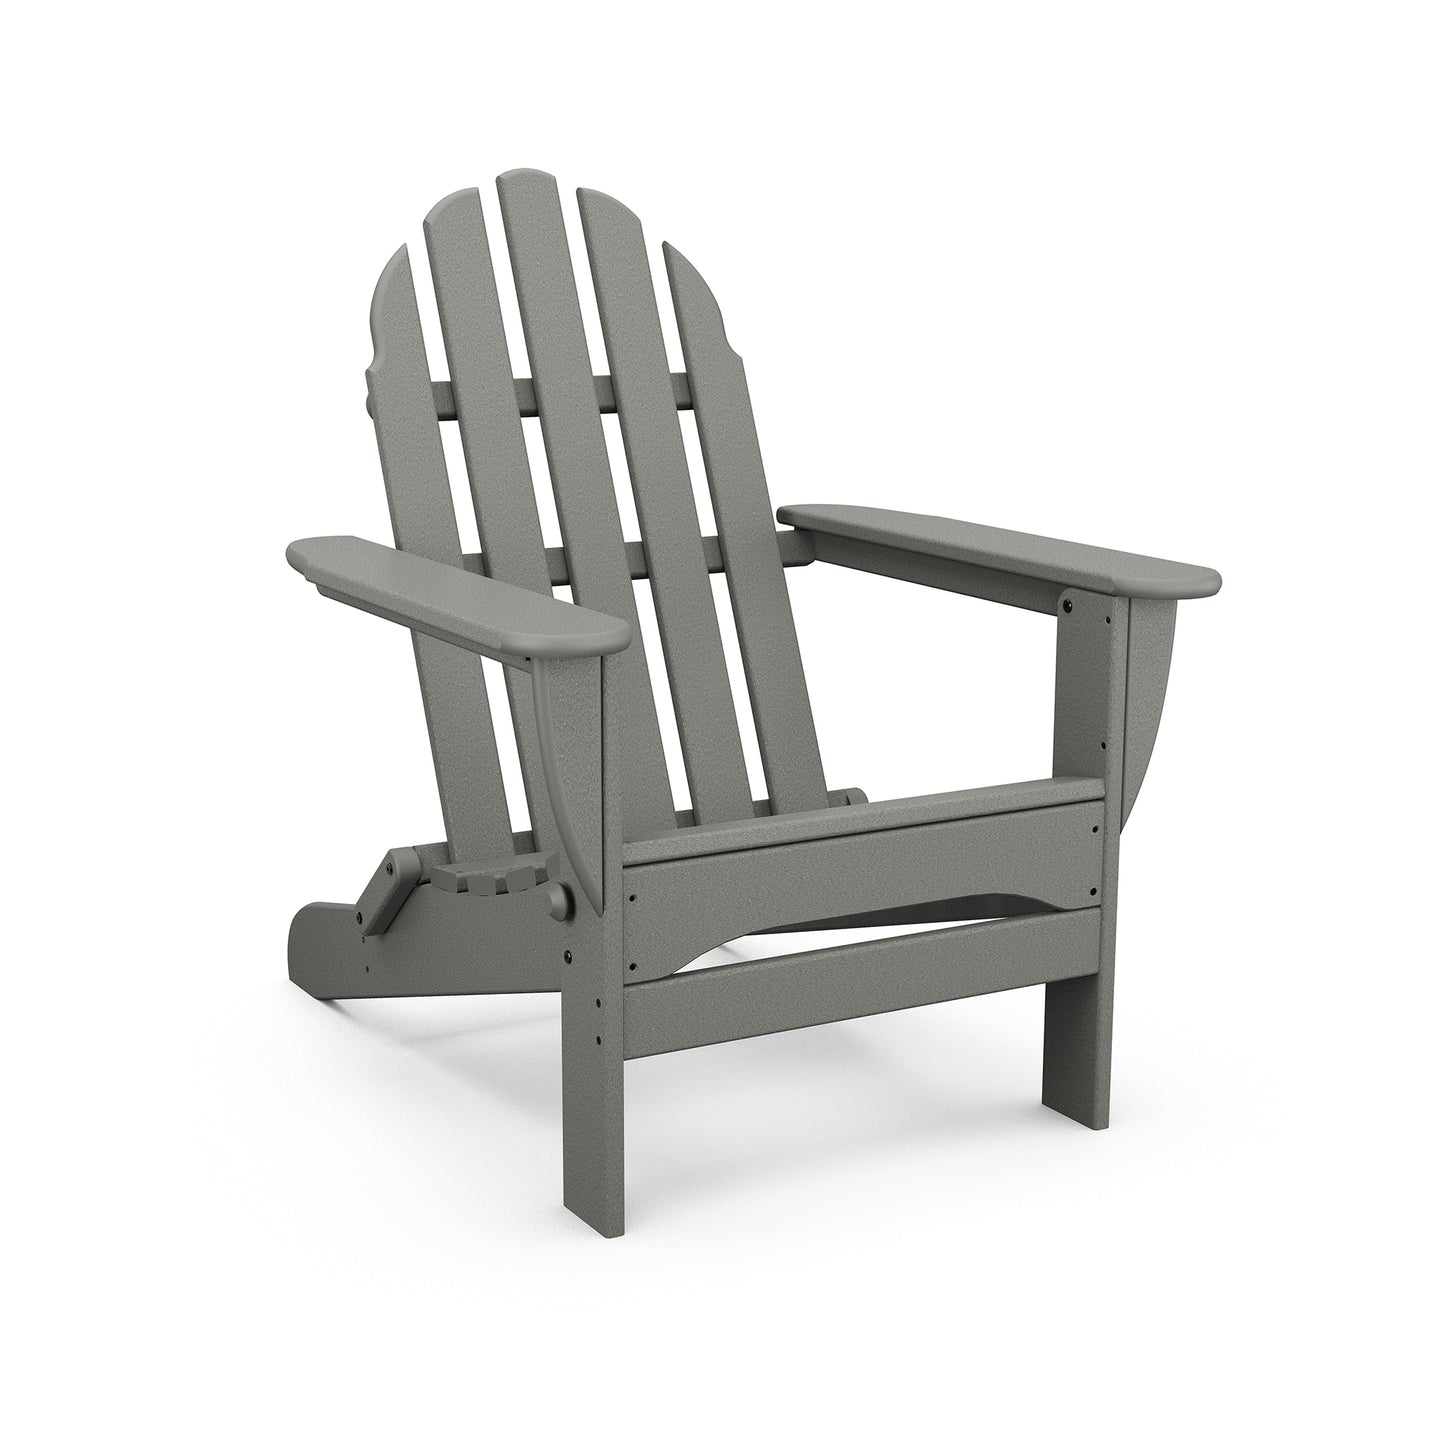 A gray POLYWOOD Classic Folding Adirondack chair made of plastic, shown in a profile view on a white background. The chair features a typical slatted back and seat design with wide armrests.